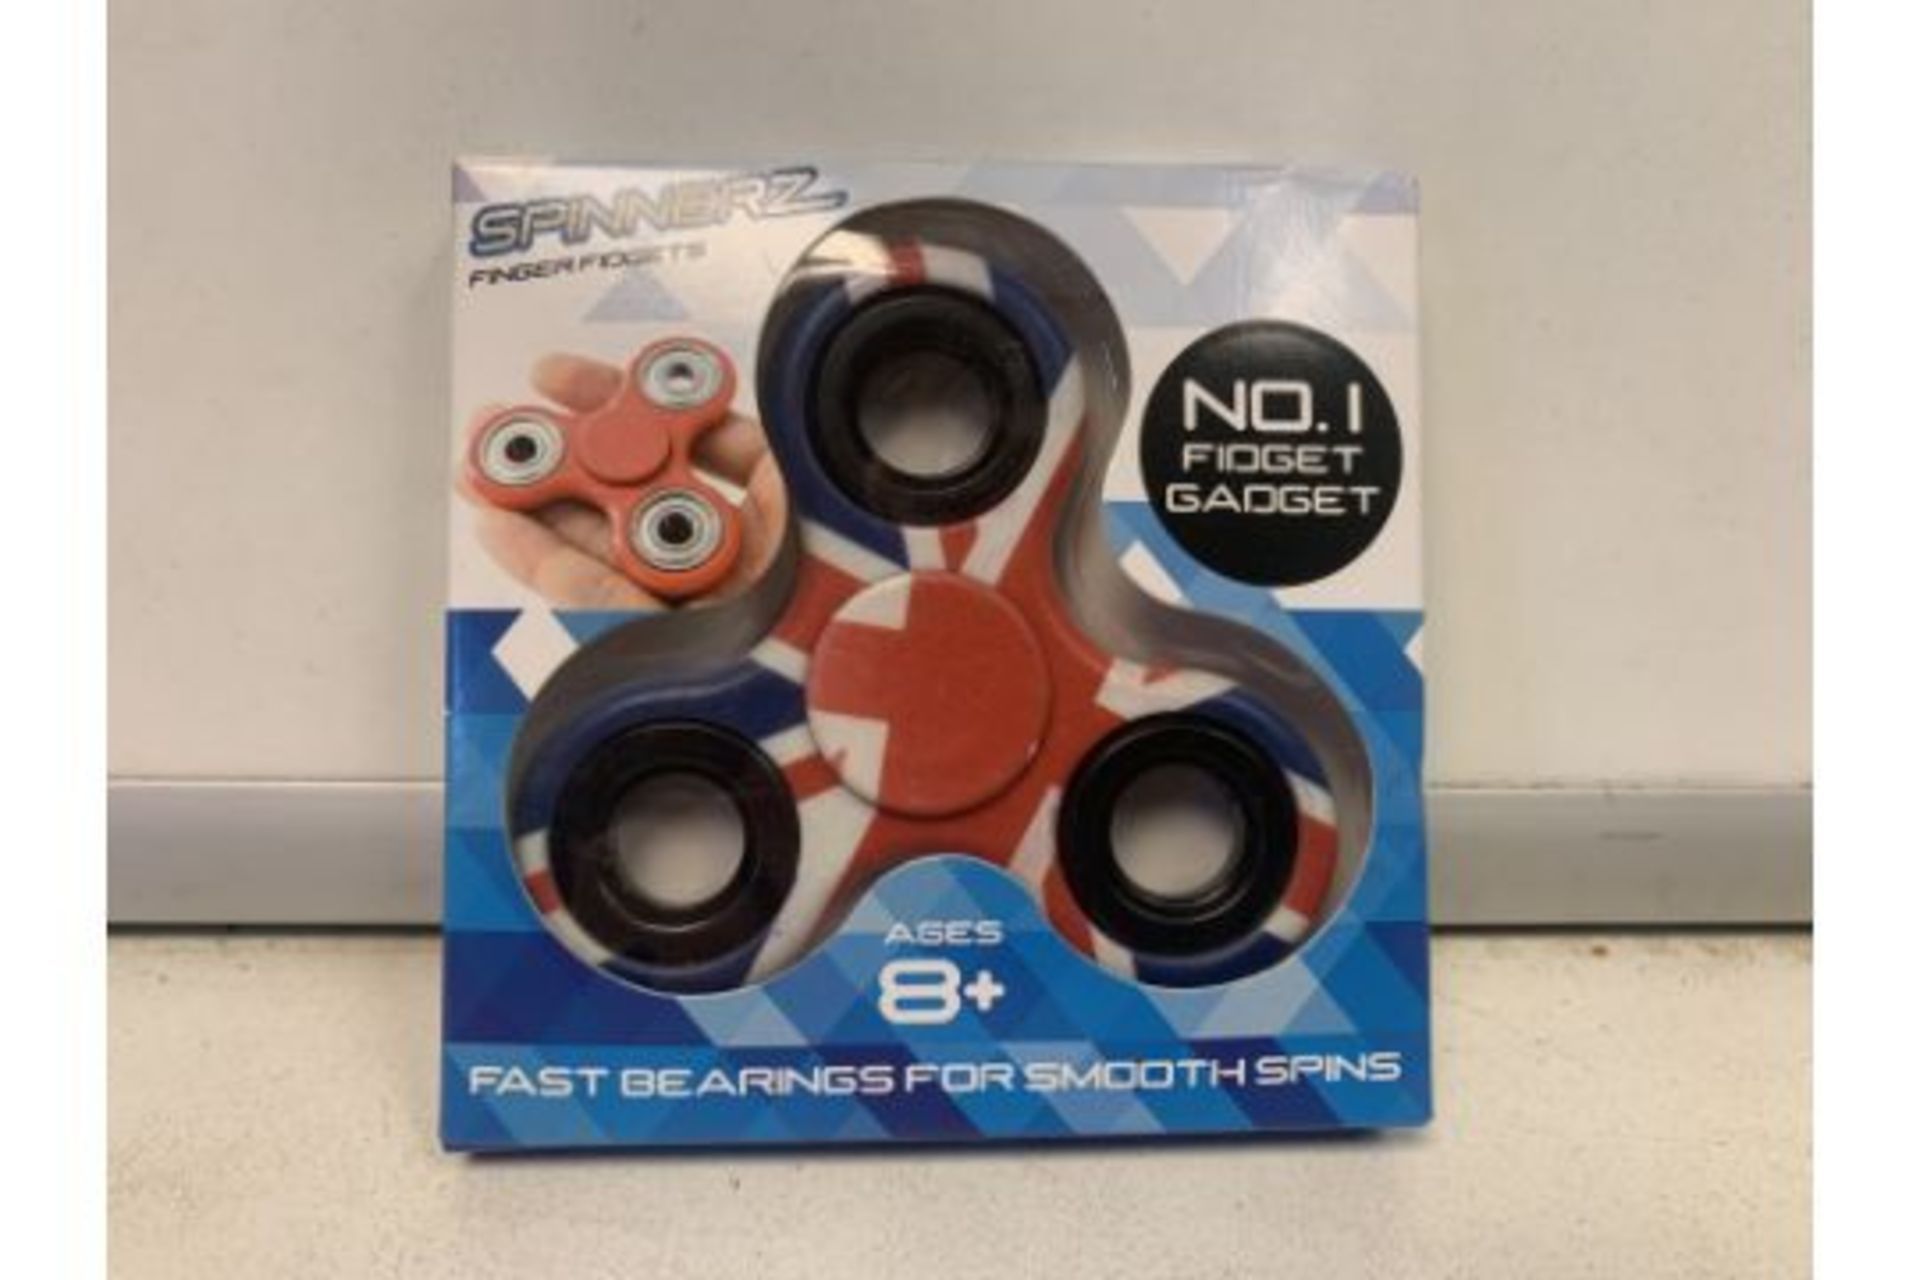 180 X NEW BOXED SPINNERZ FIGER FIDGETS FIDGET SPINNERS. DESIGNS MAY VARY. (ROW15)